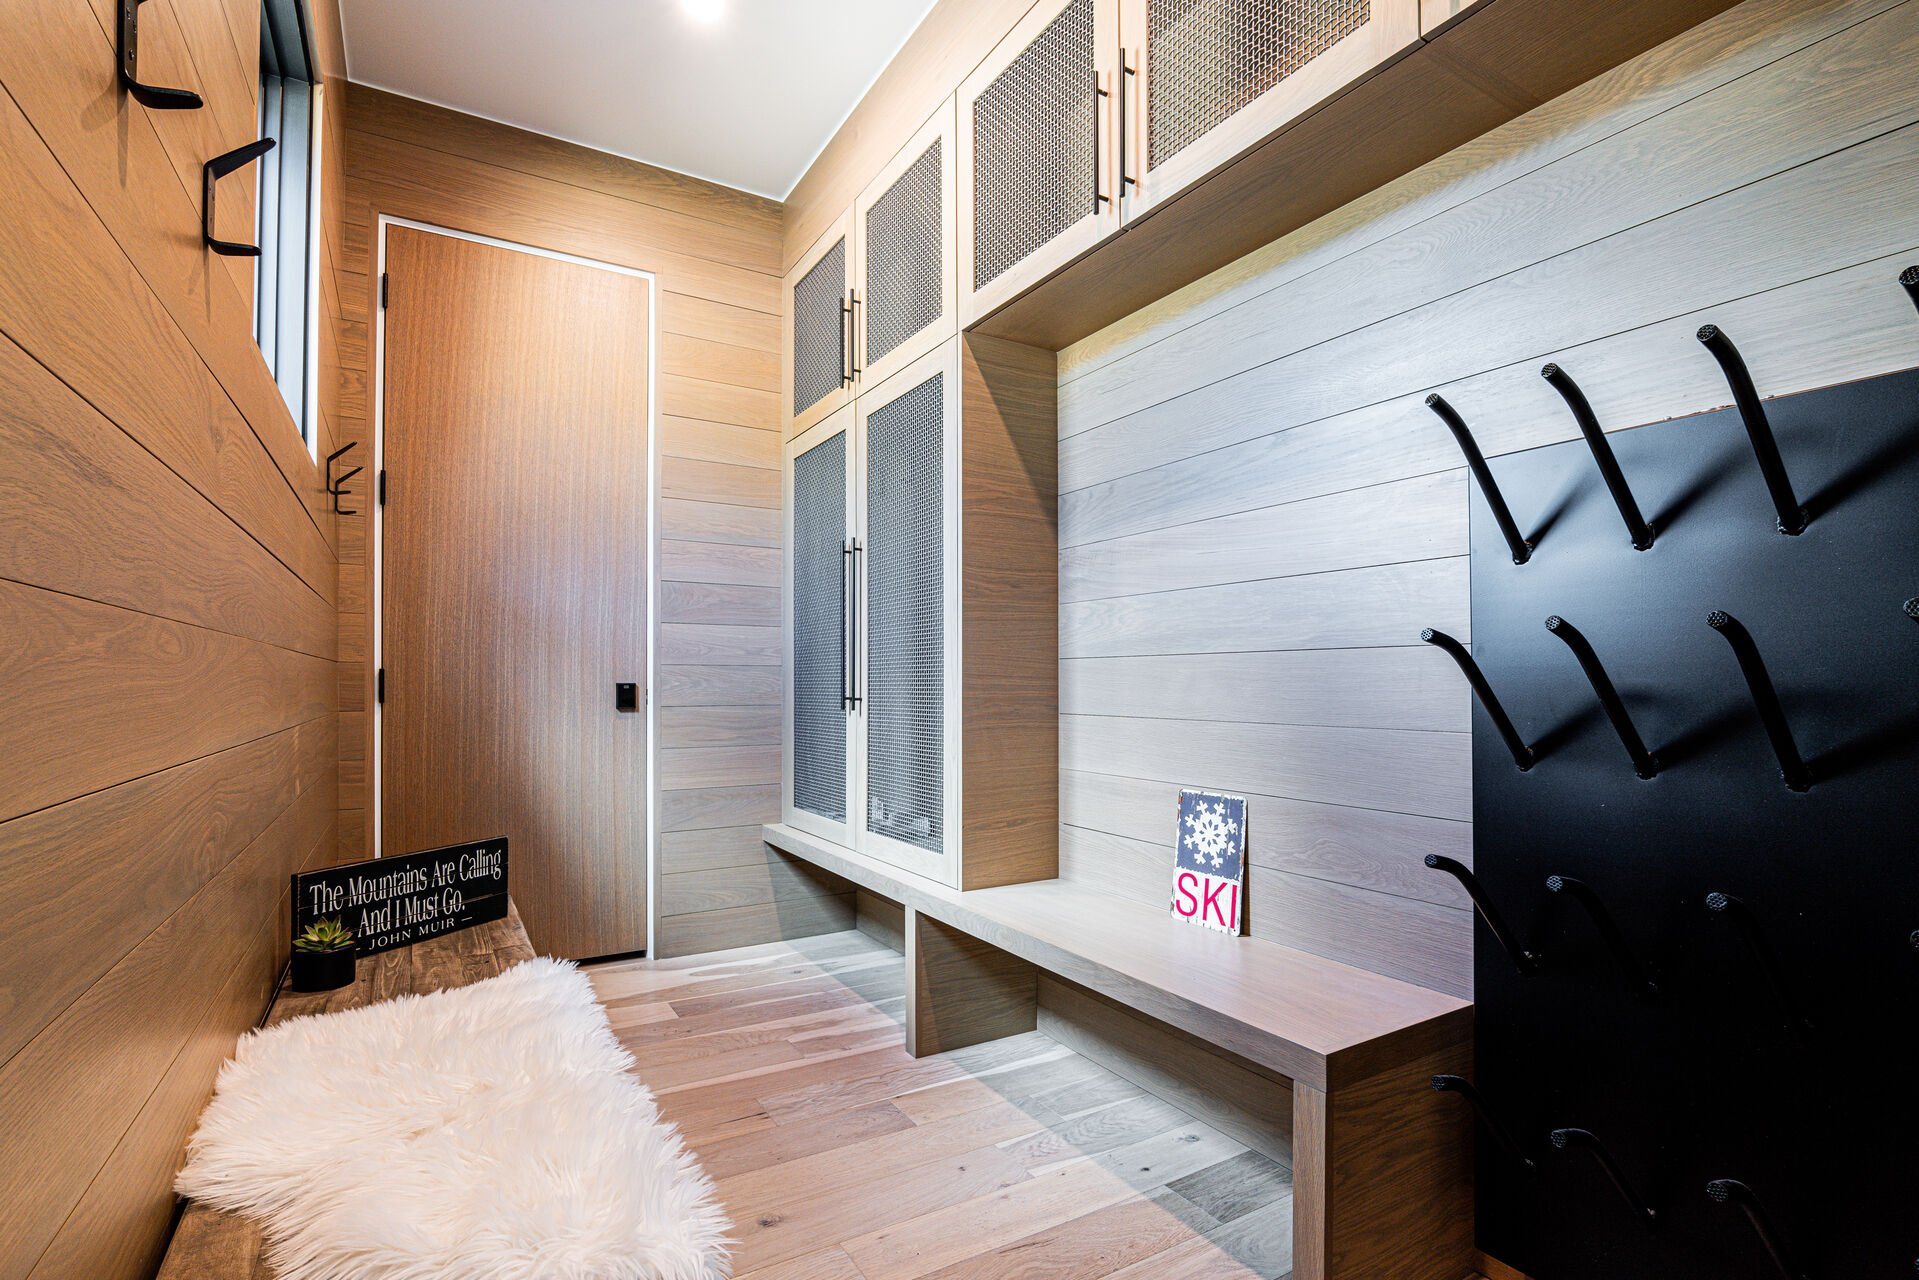 Mudroom with storage space and boot heaters